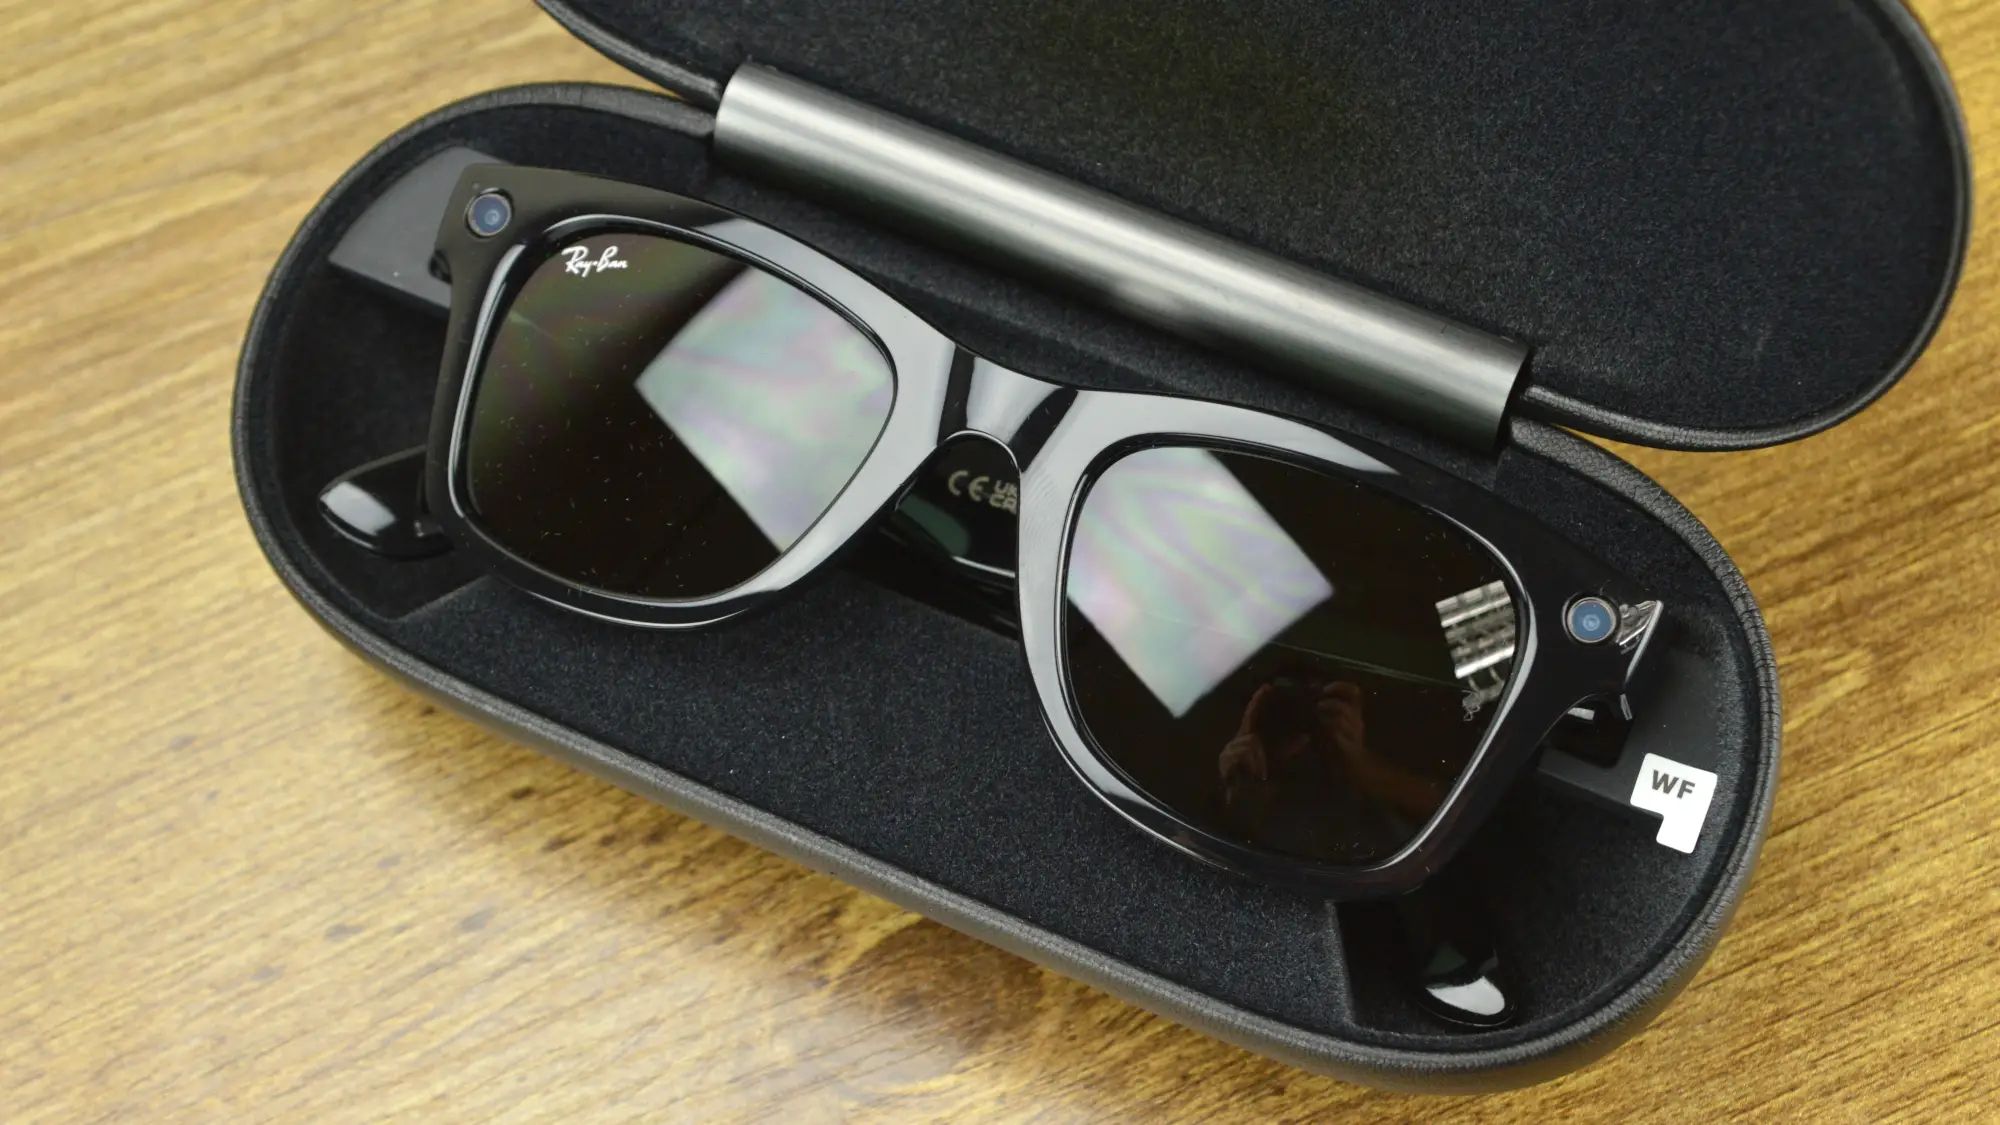 How To Charge Ray Ban Smart Glasses